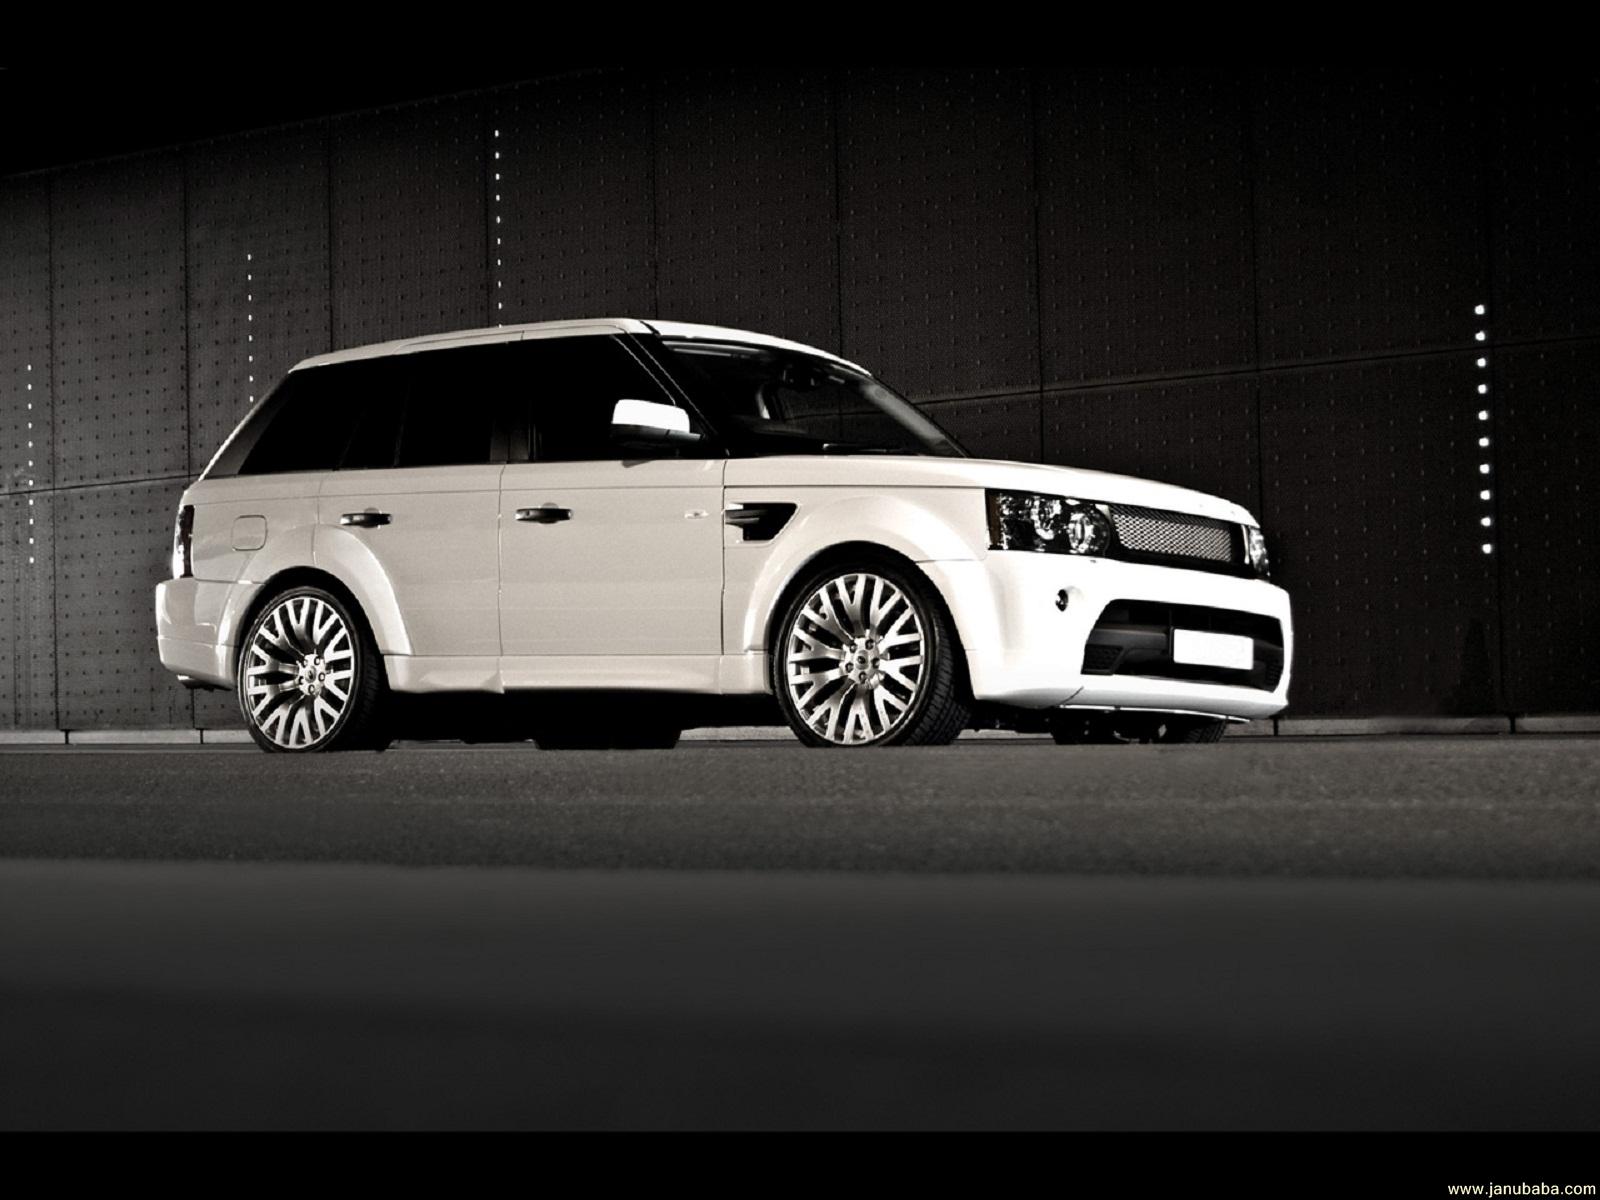 2010 Project Kahn Range Rover Sport RS600 by cheema wallpaper ...